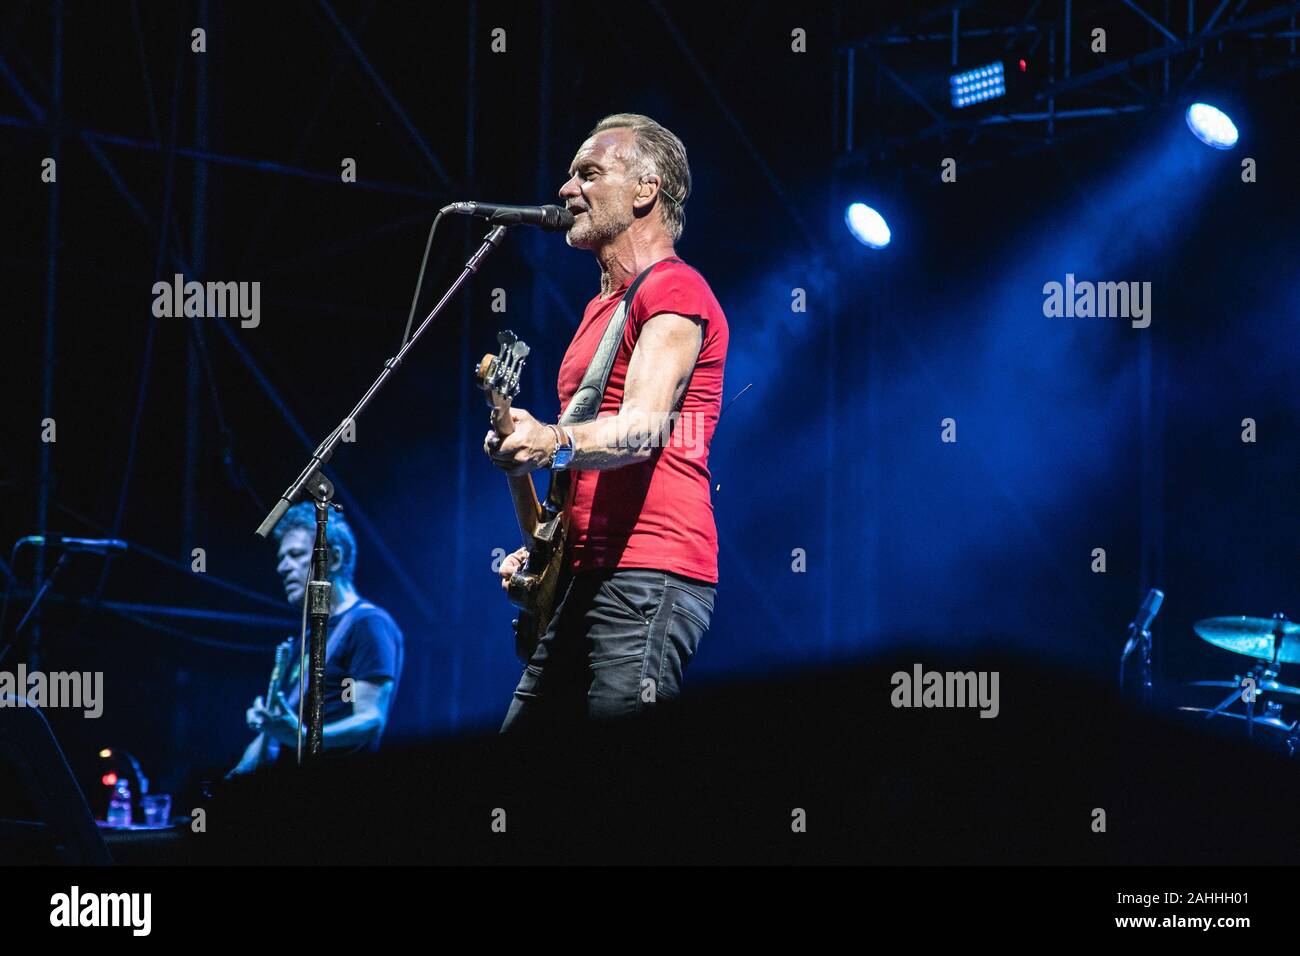 Sting during Sting - My Songs Tour 2019, Geox Live Arena, Padova, Italy, 30  Jul 2019 Stock Photo - Alamy